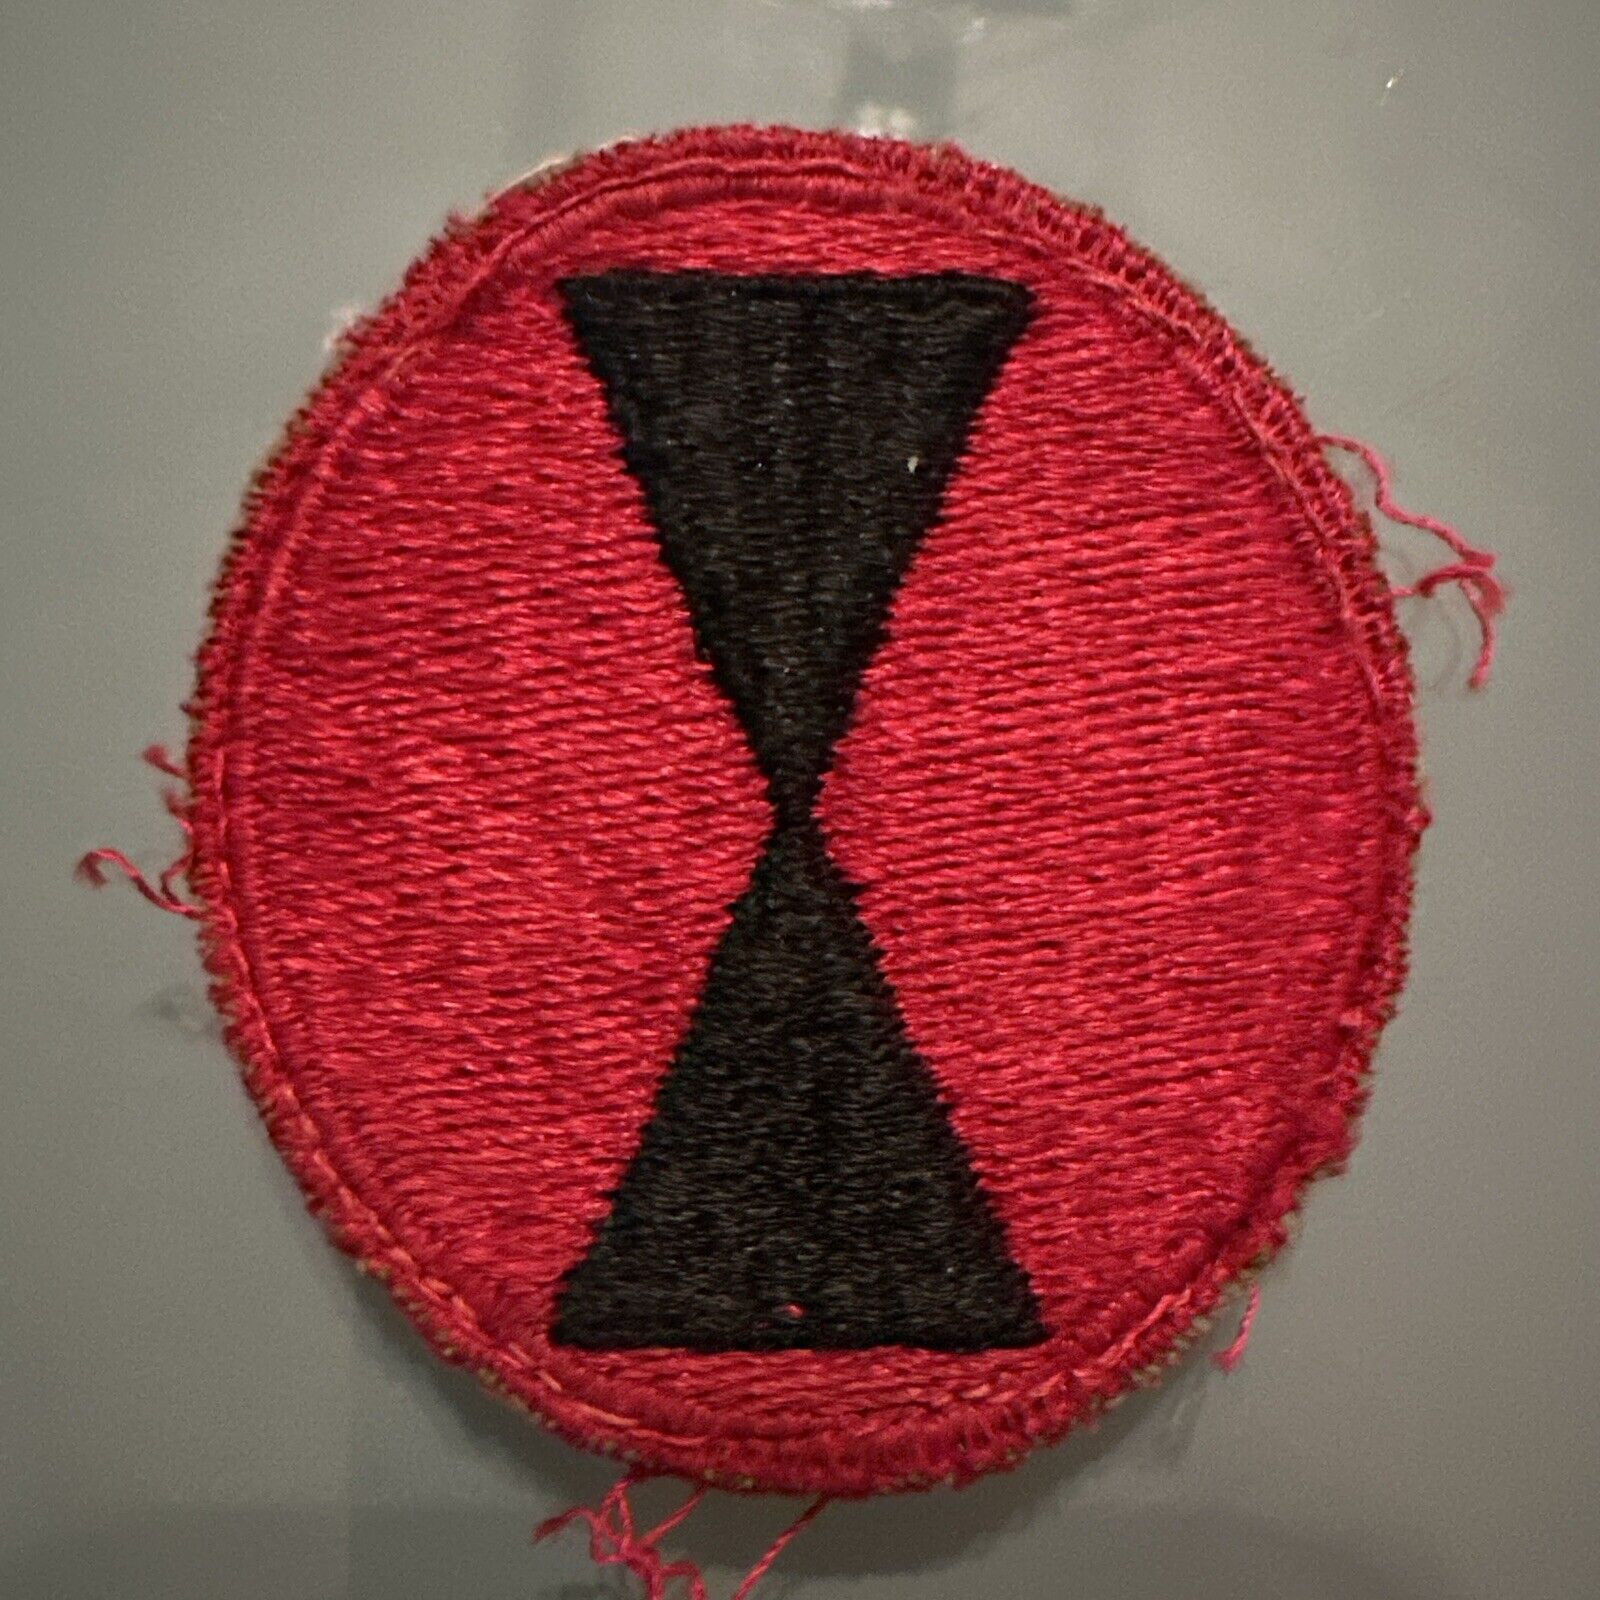 WW2 WWII Military 7 Infantry Division Red Border White Back Patch Badge